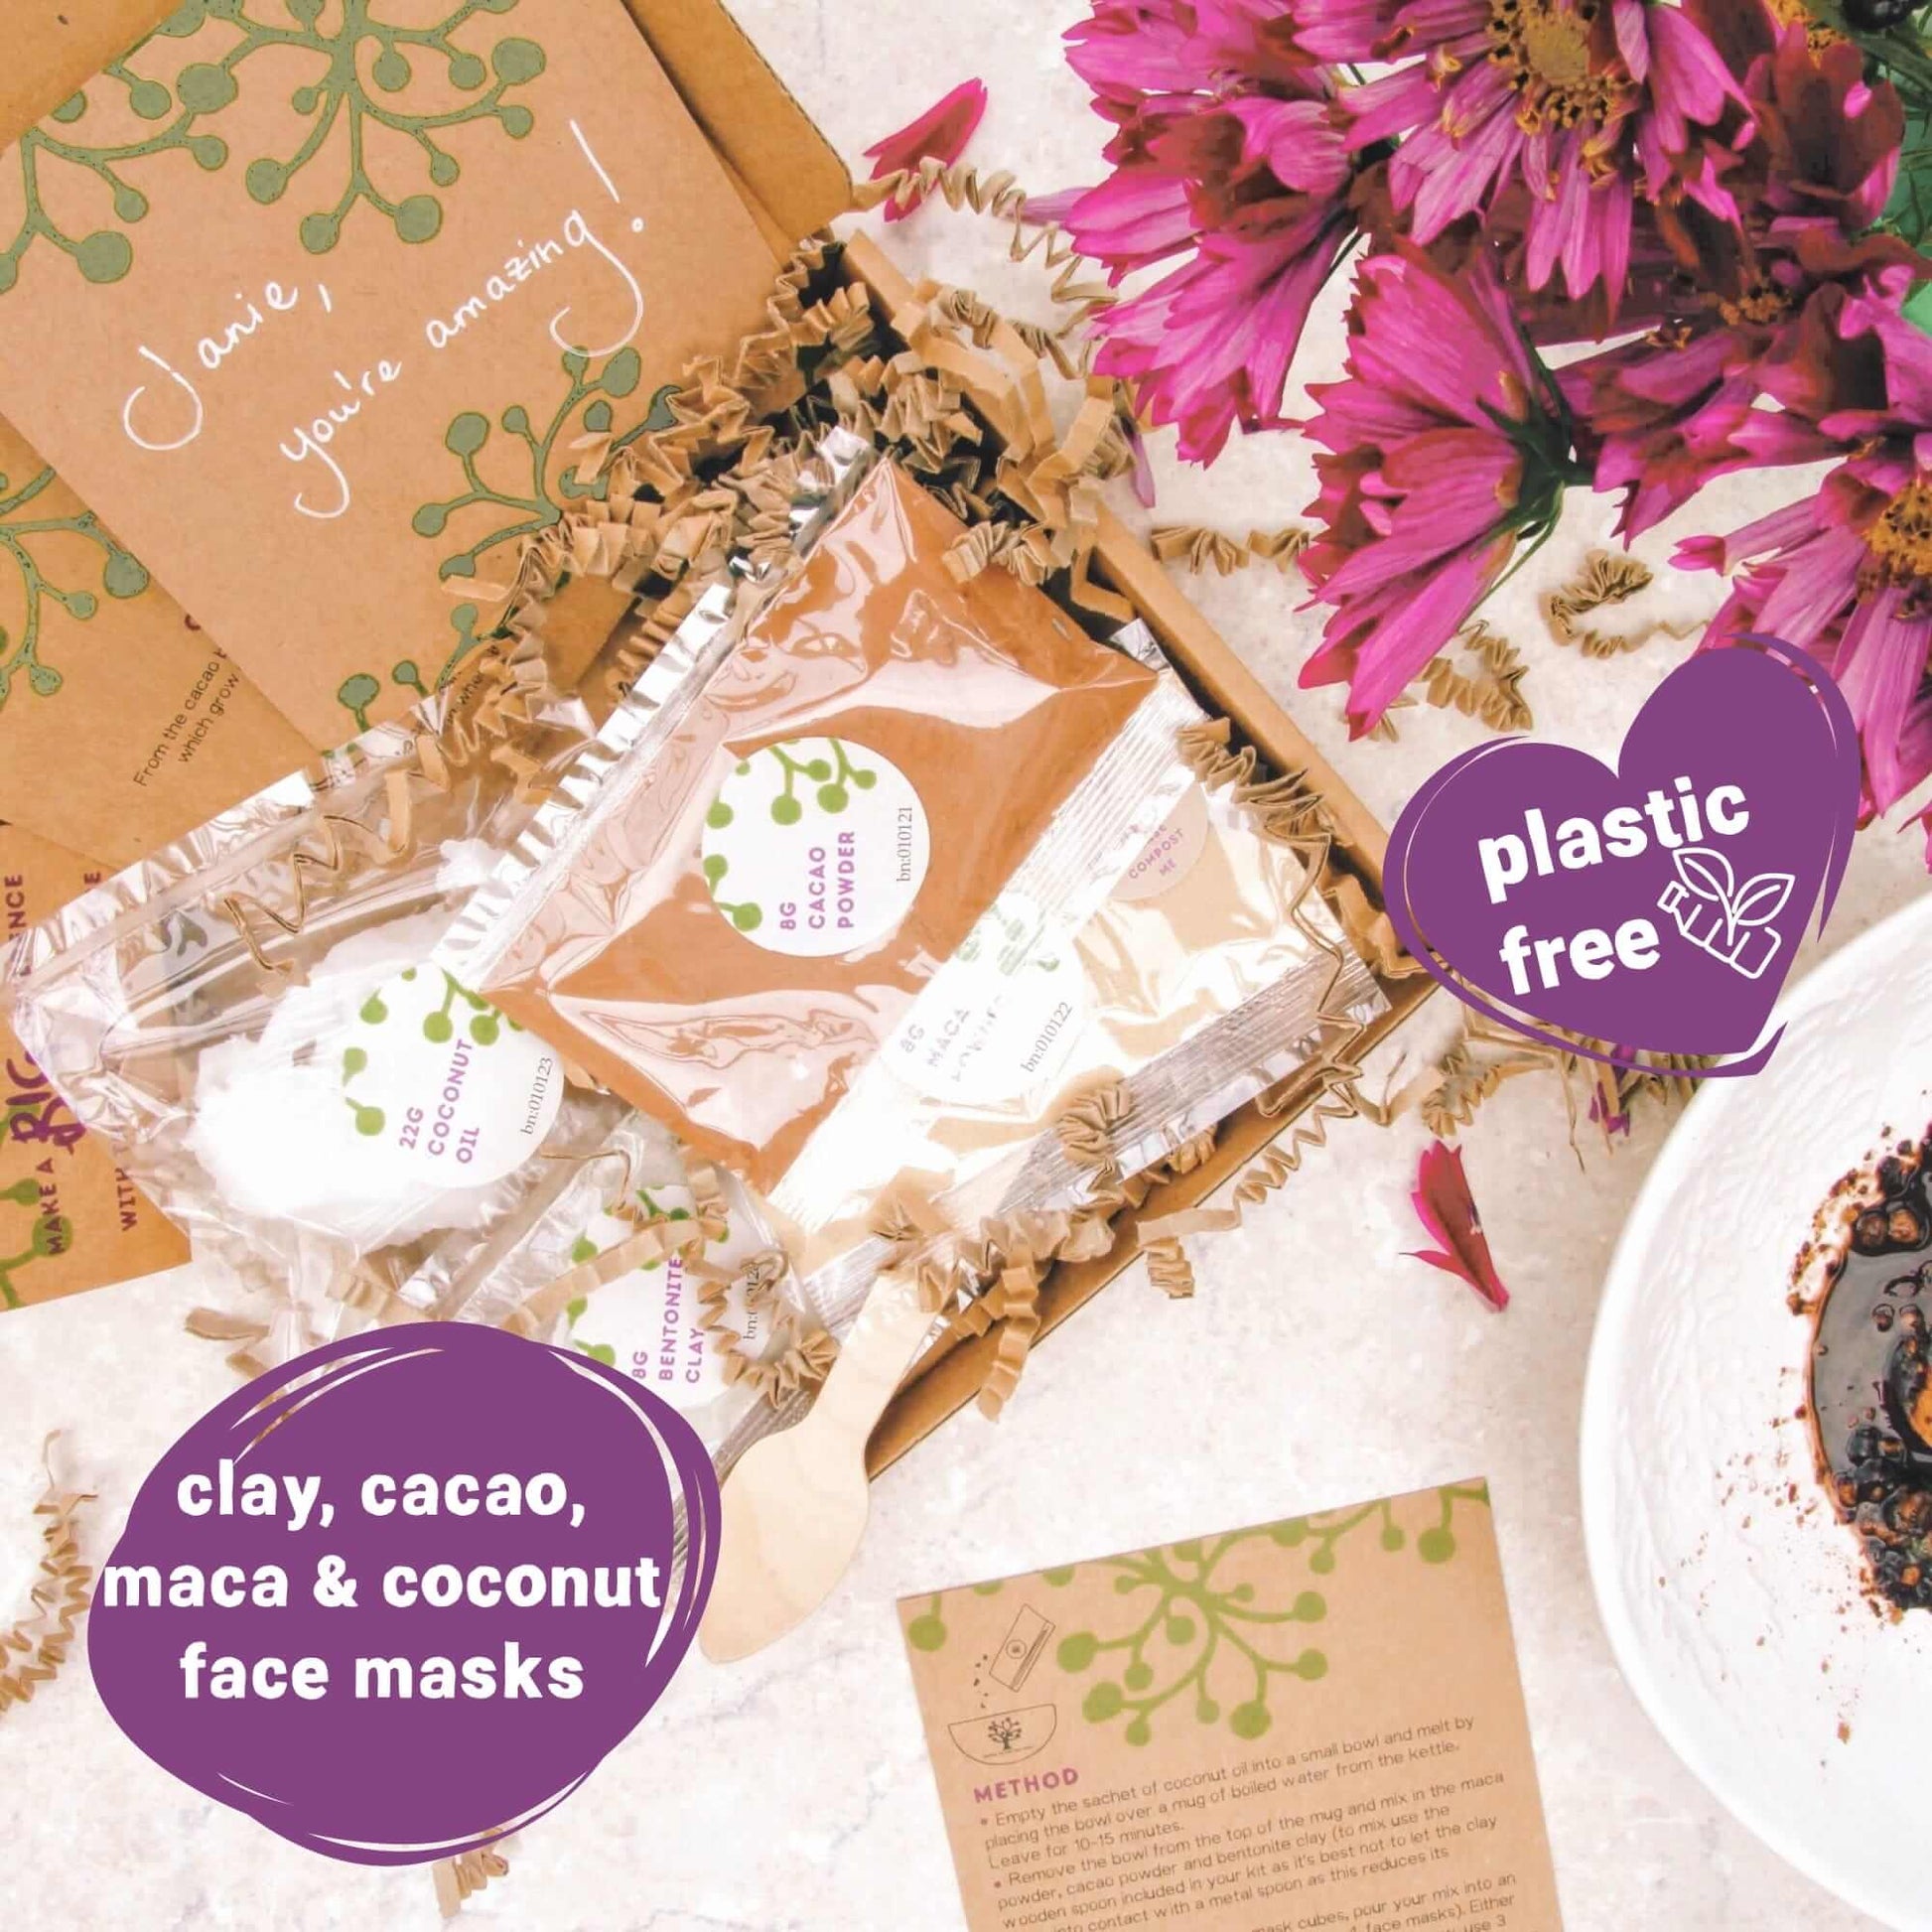 clay & cacao face mask kit inside birthday gift